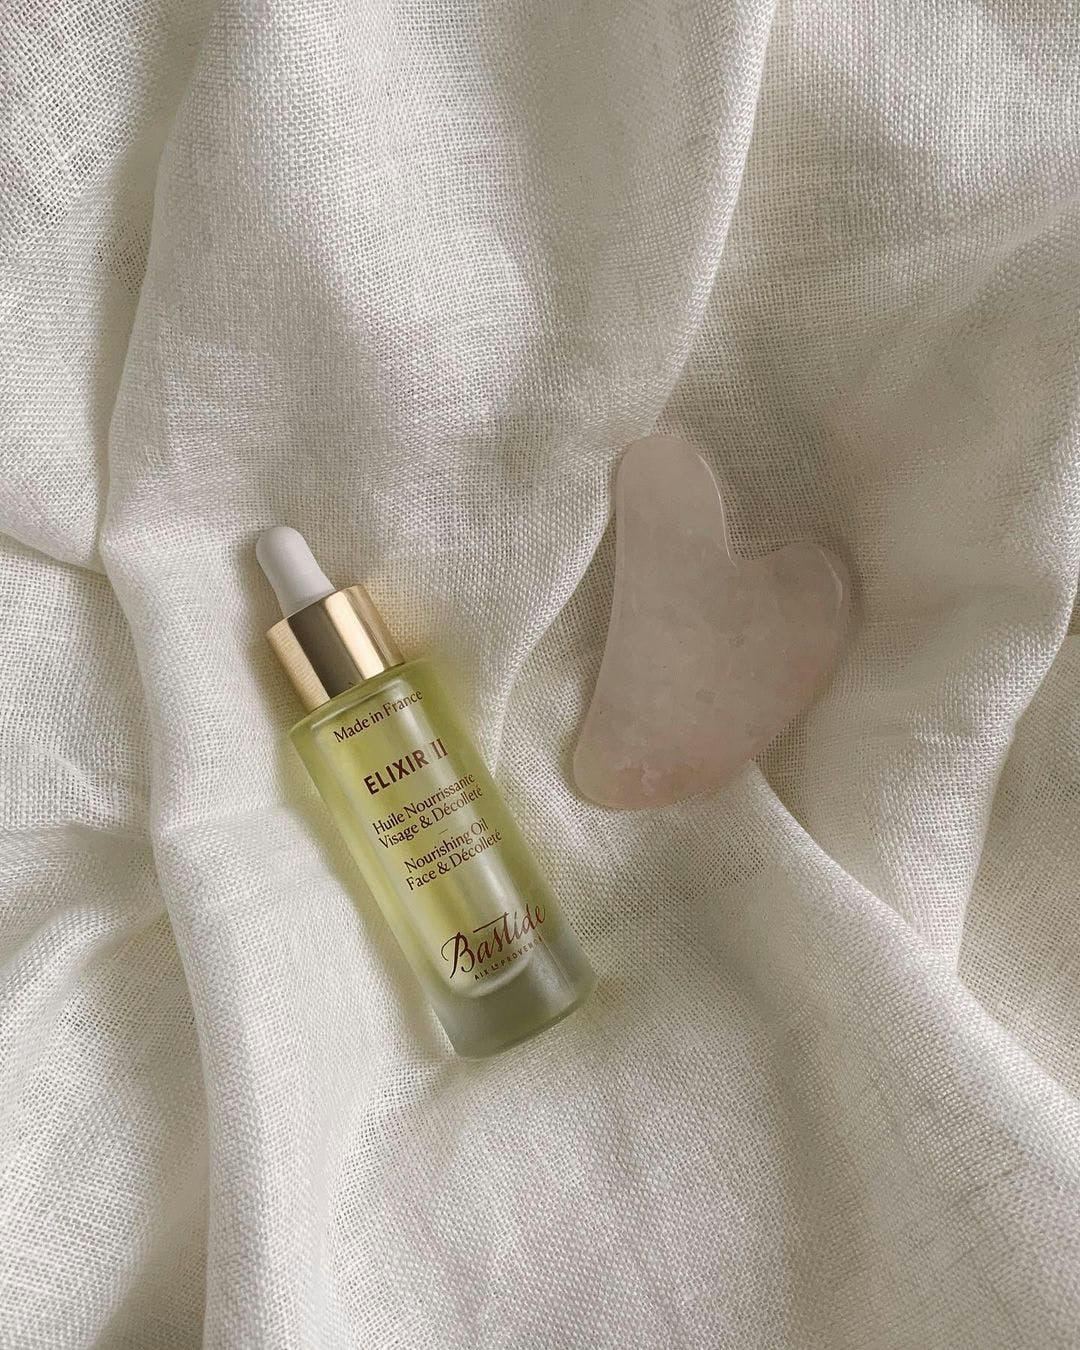 A serum and gua sha lie on a white comforter or sheet.